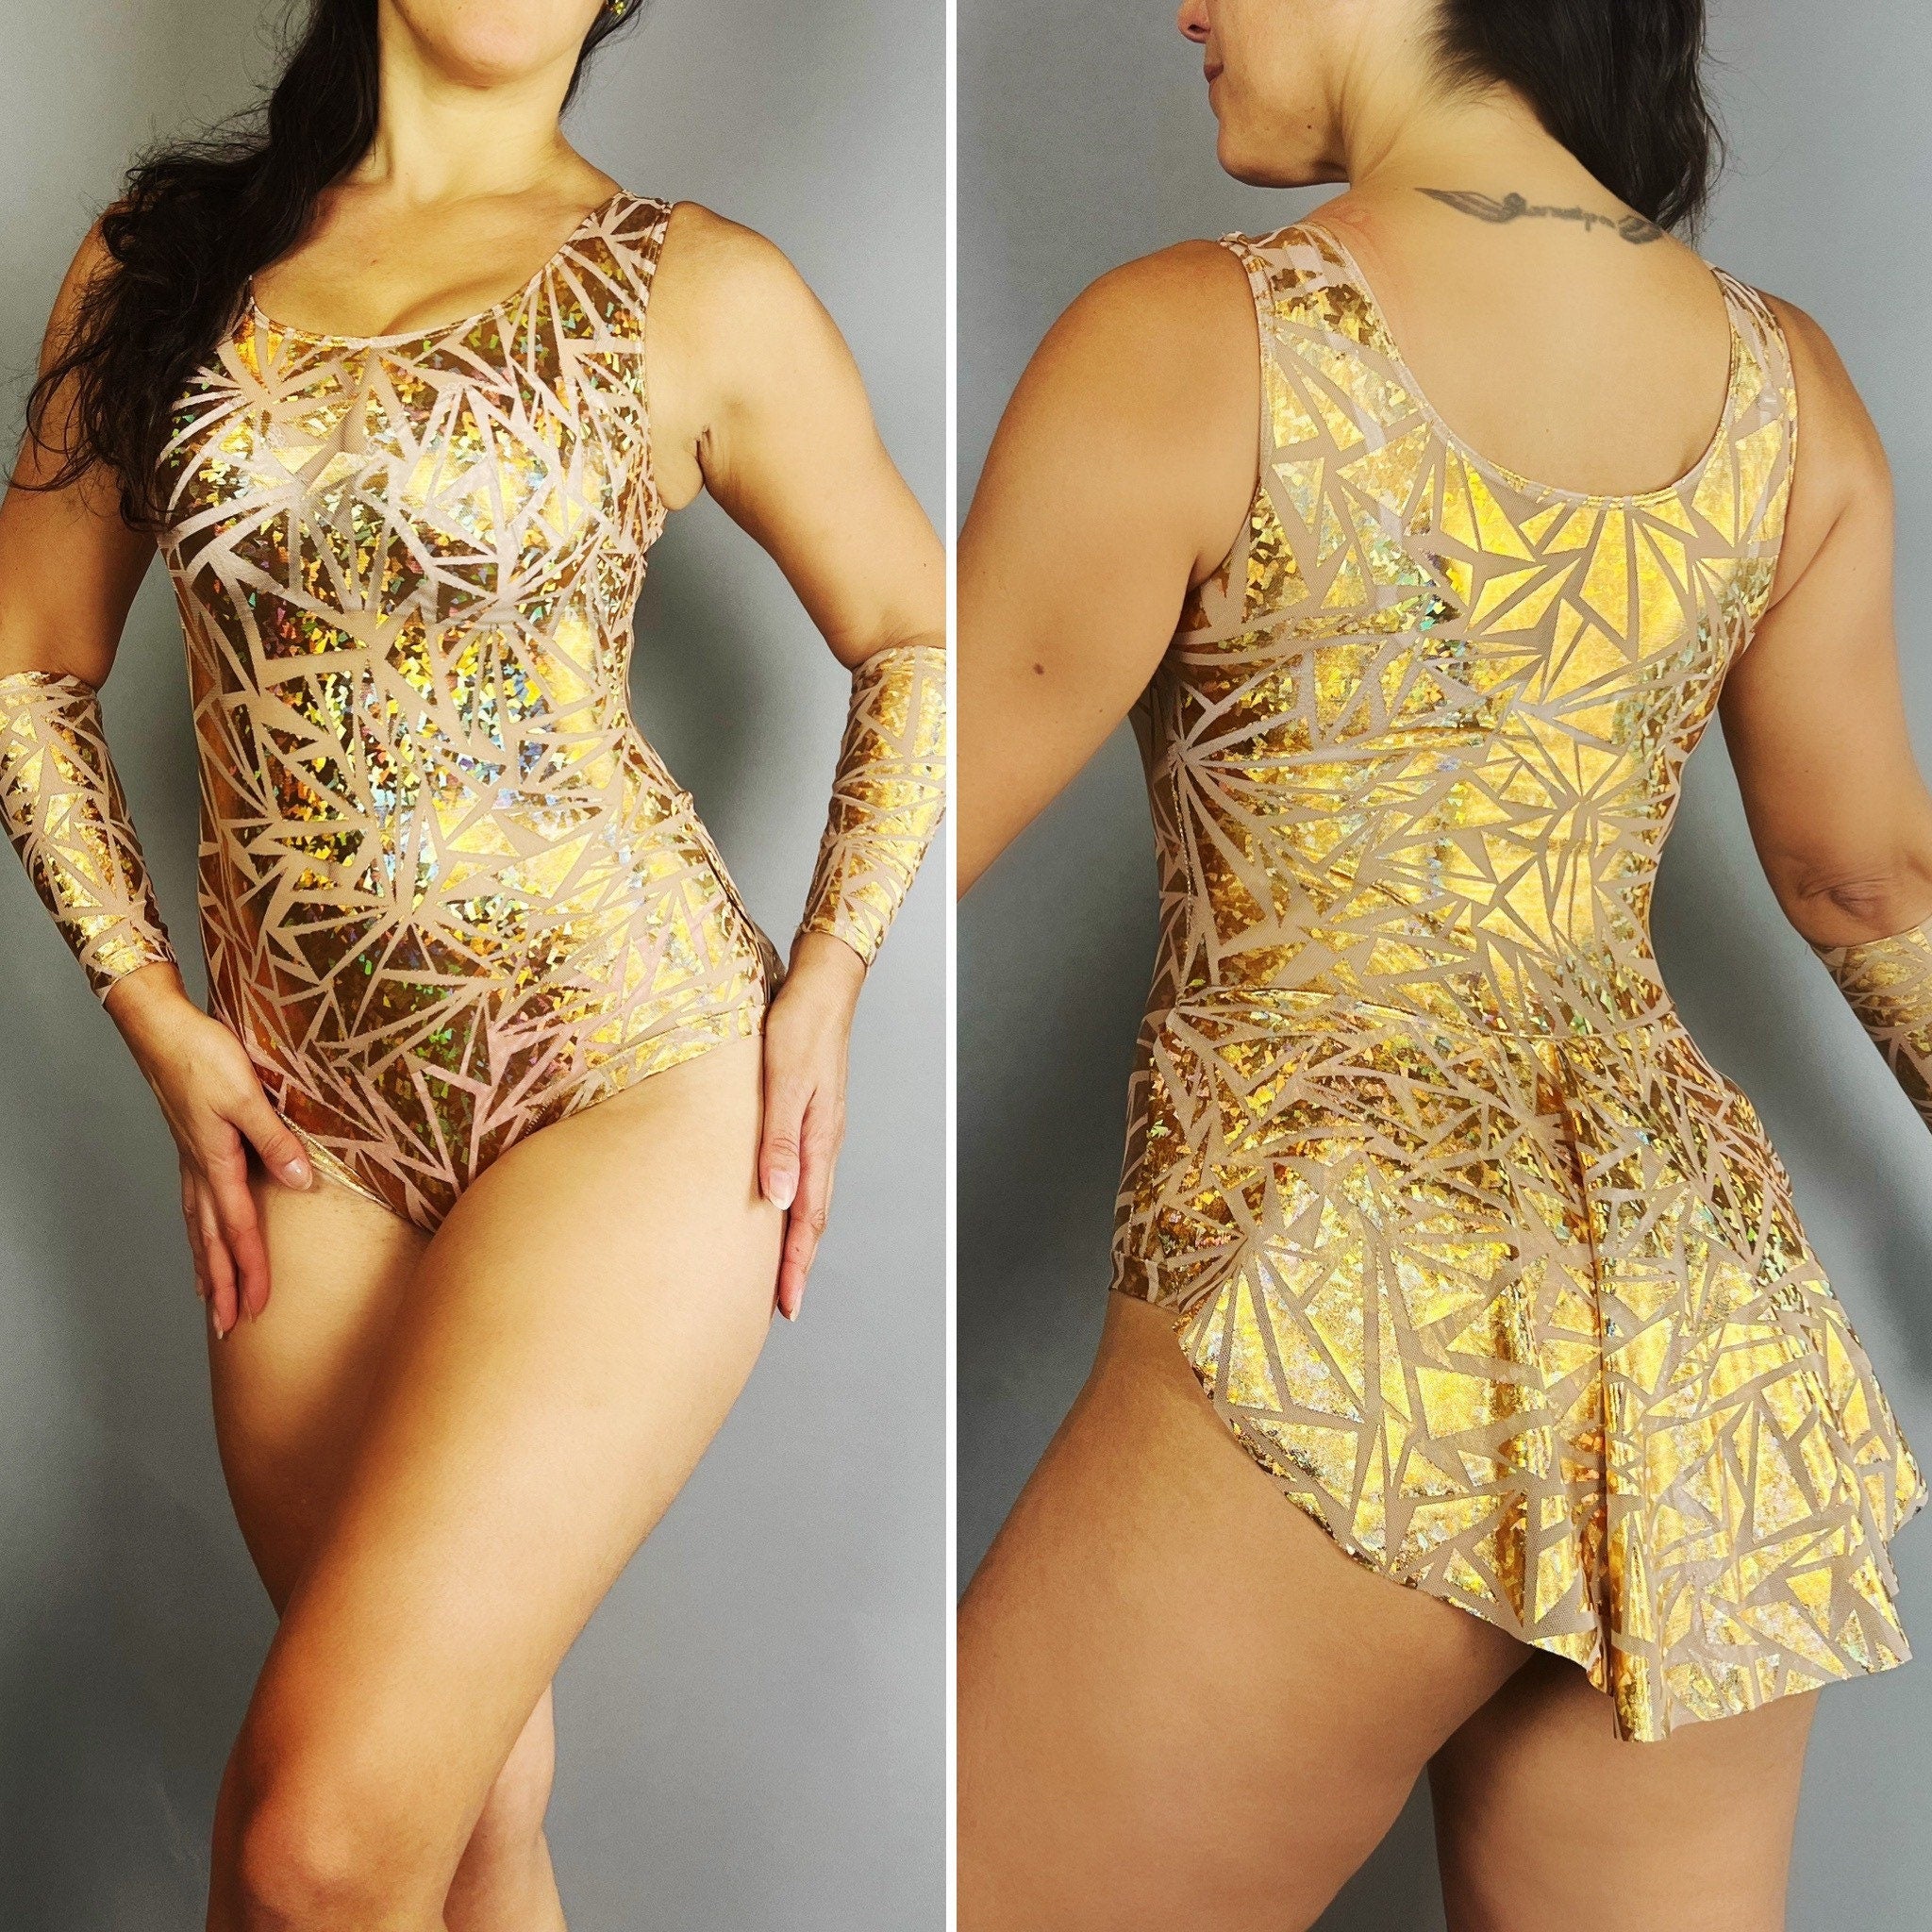 Circus Costume, Showgirl Bodysuit, Gymnastic Outfit, Festival Fashion, Trending Now